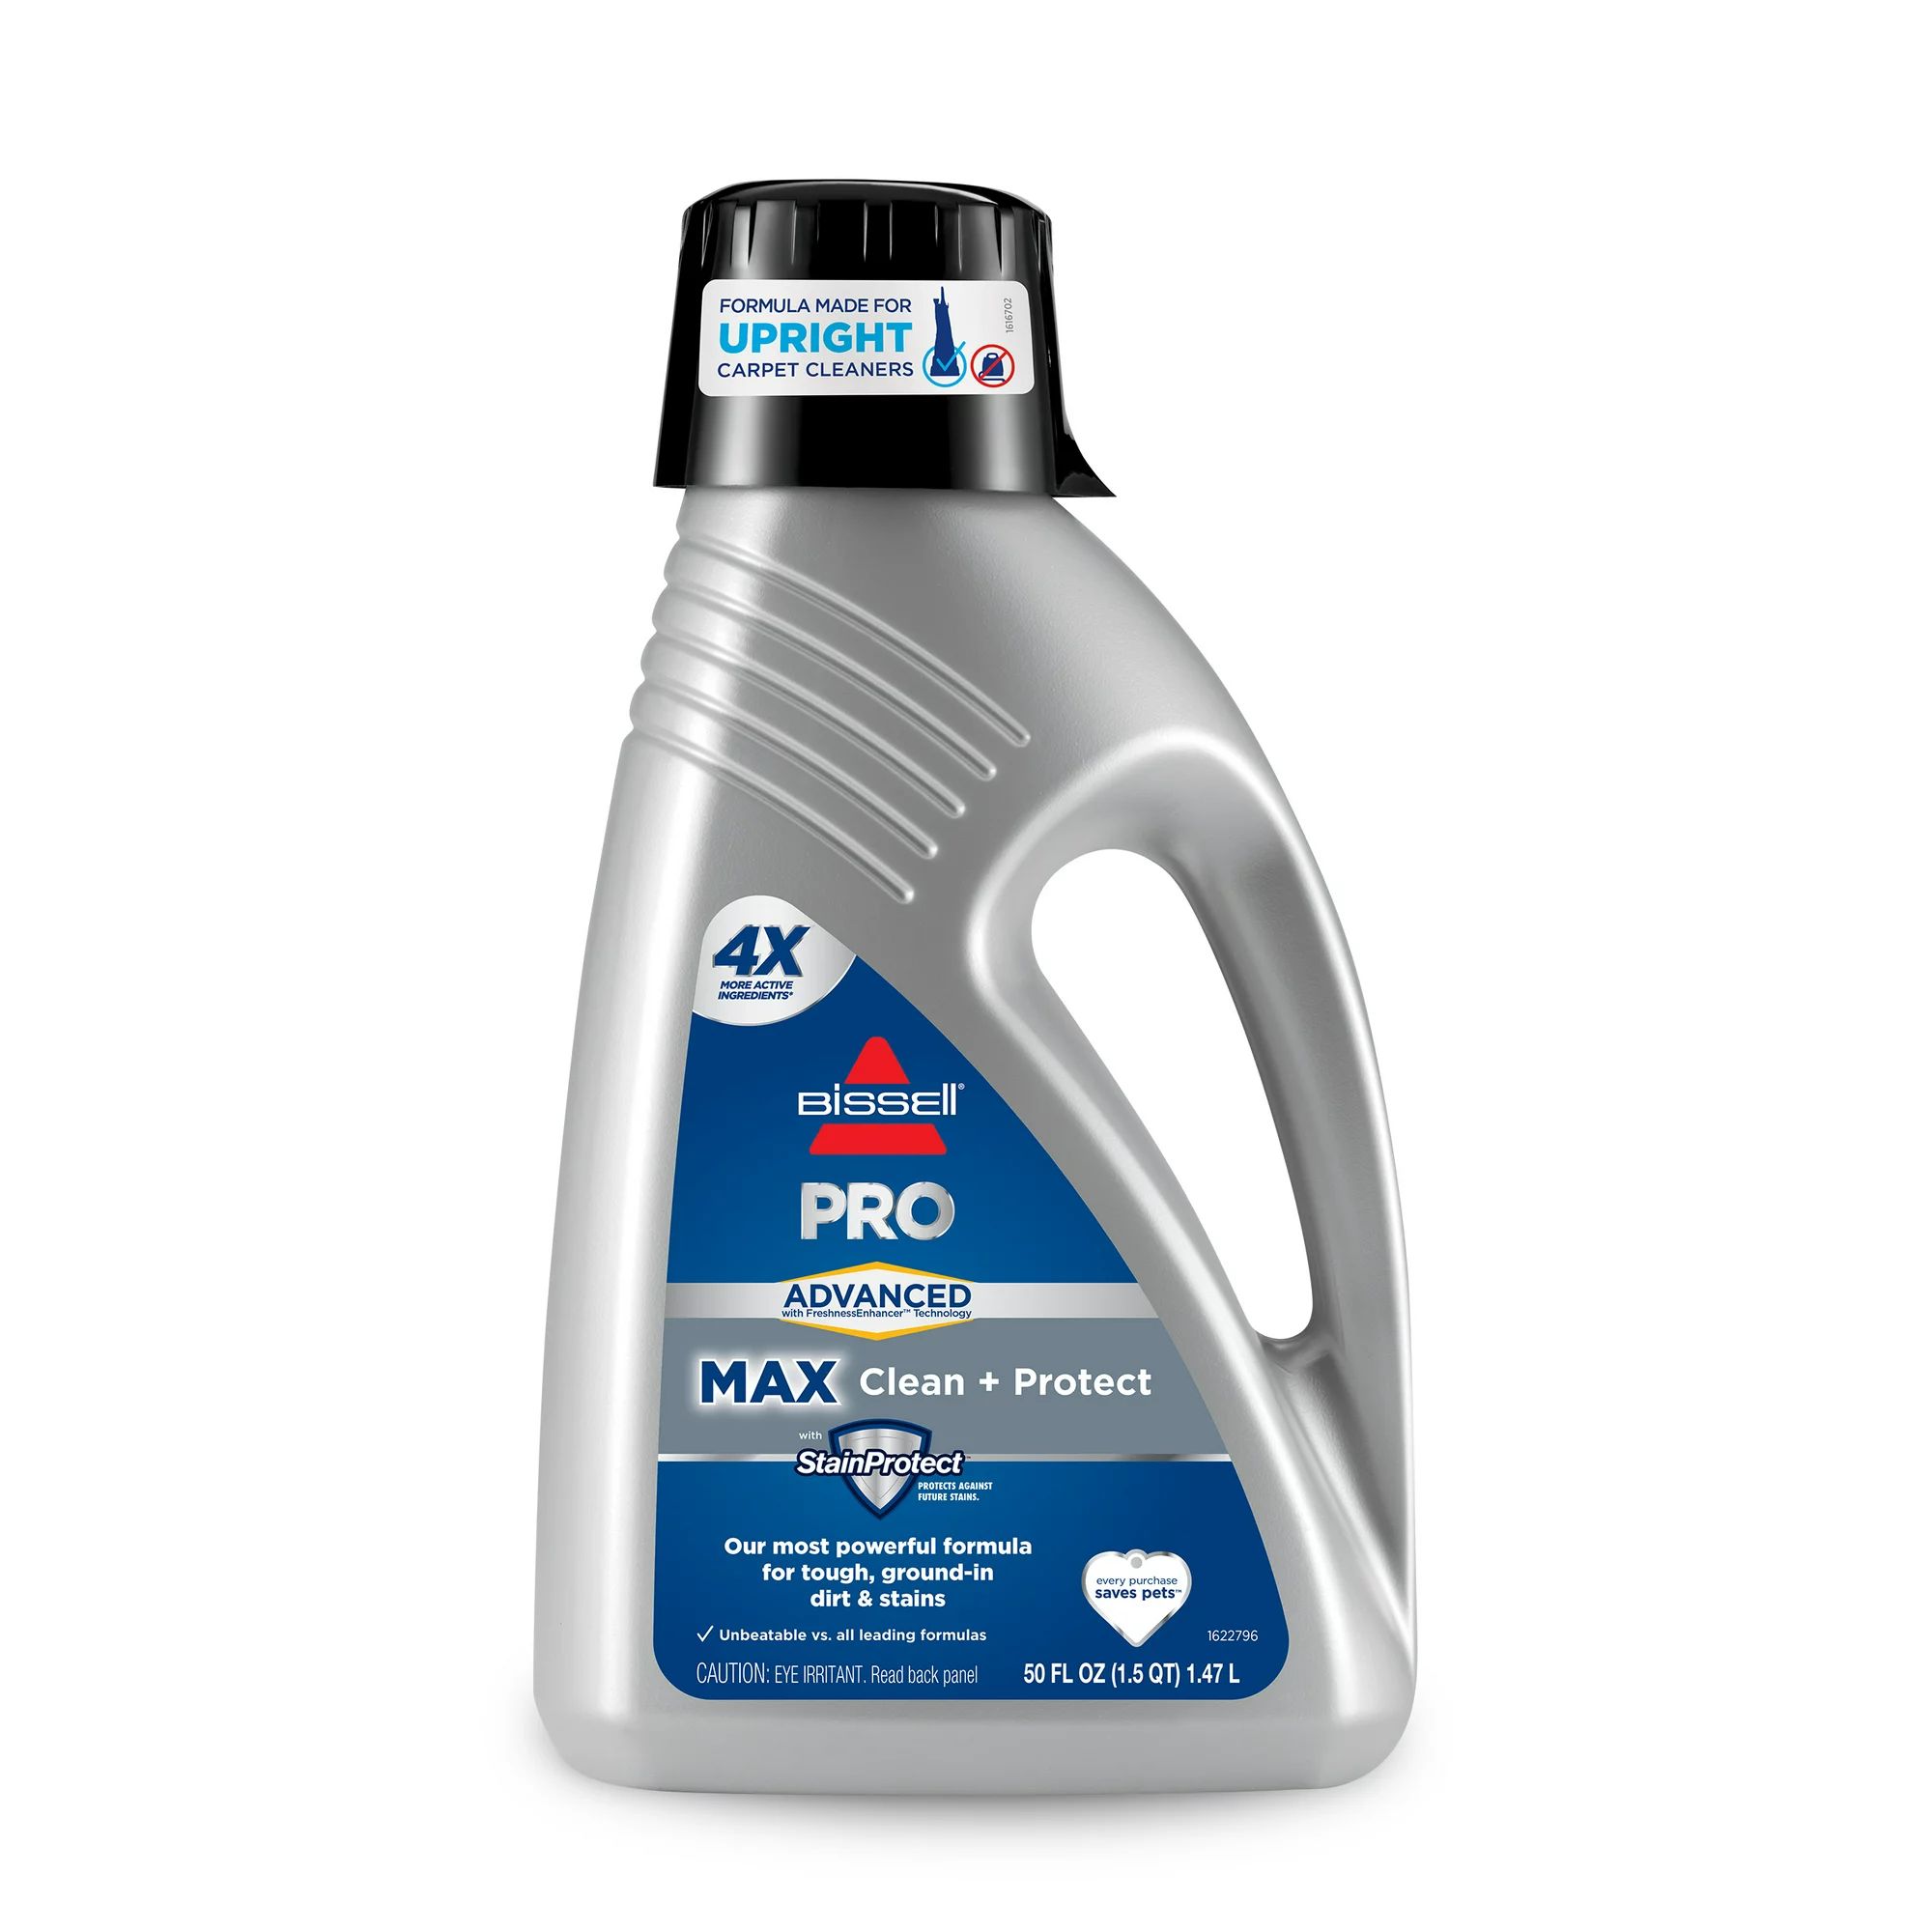 BISSELL Advanced Pro Max Clean + Protect Deep Cleaning Carpet Formula, 50 oz, 70E1 | Walmart (US)